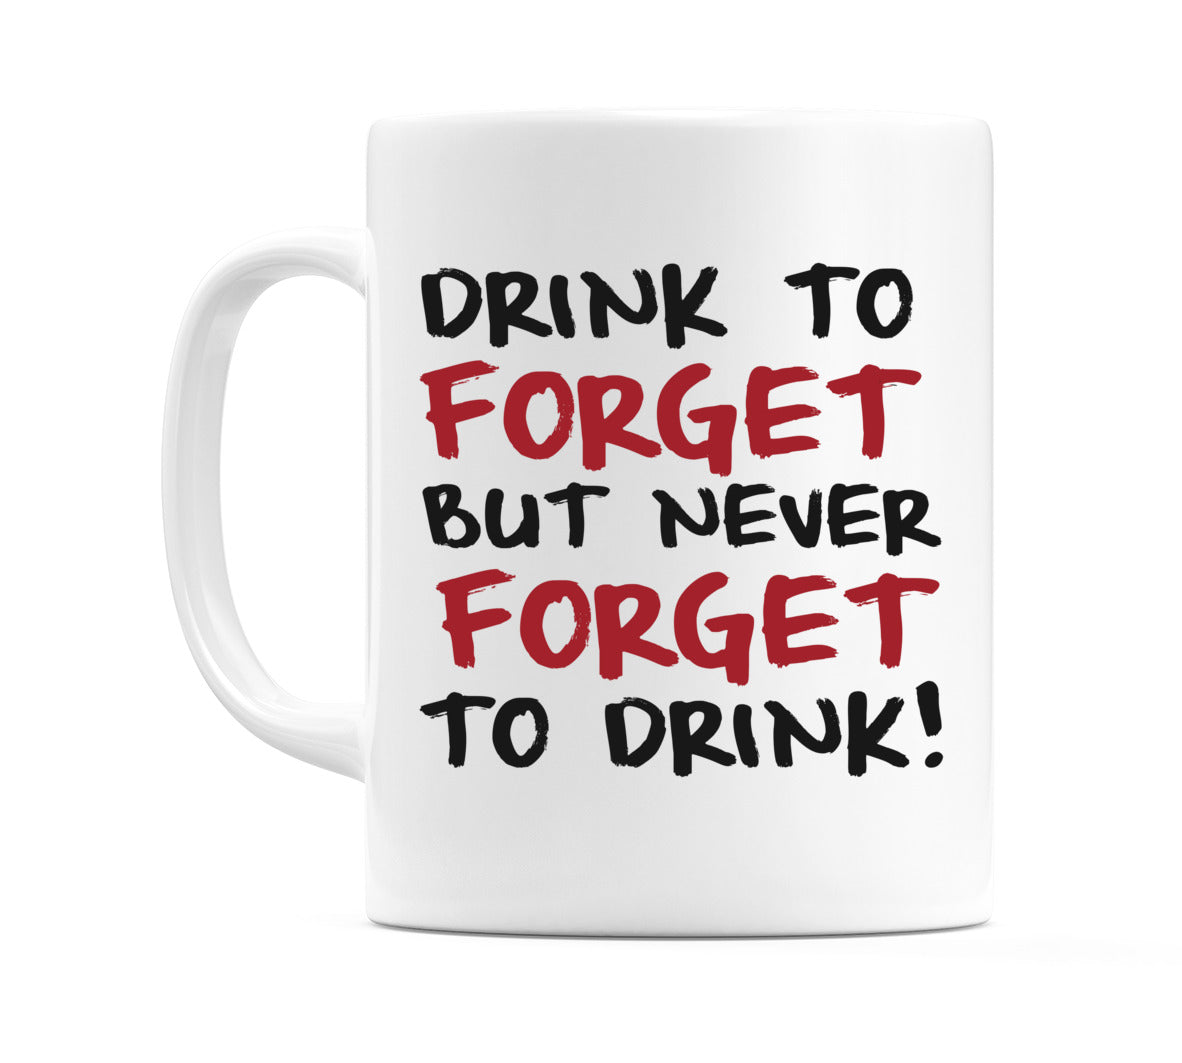 Drink To Forget But Never Forget To Drink! Mug